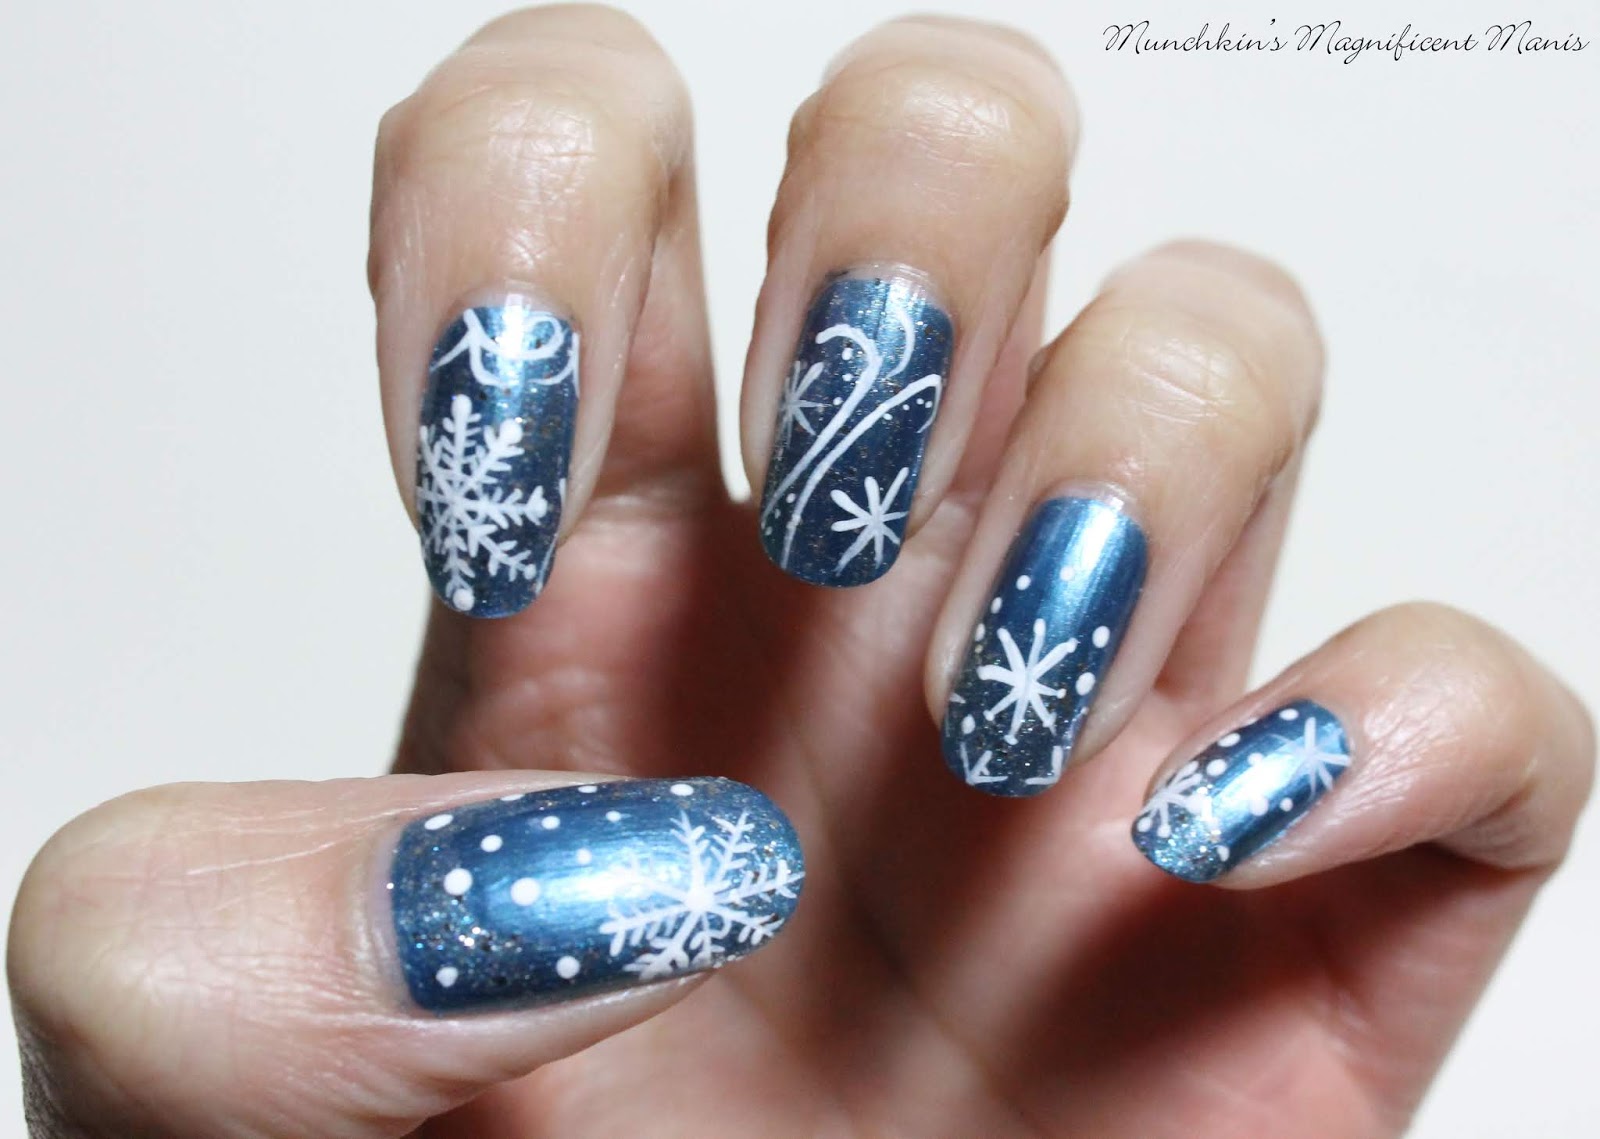 7. Glittery snowflake nail design for little girls - wide 7